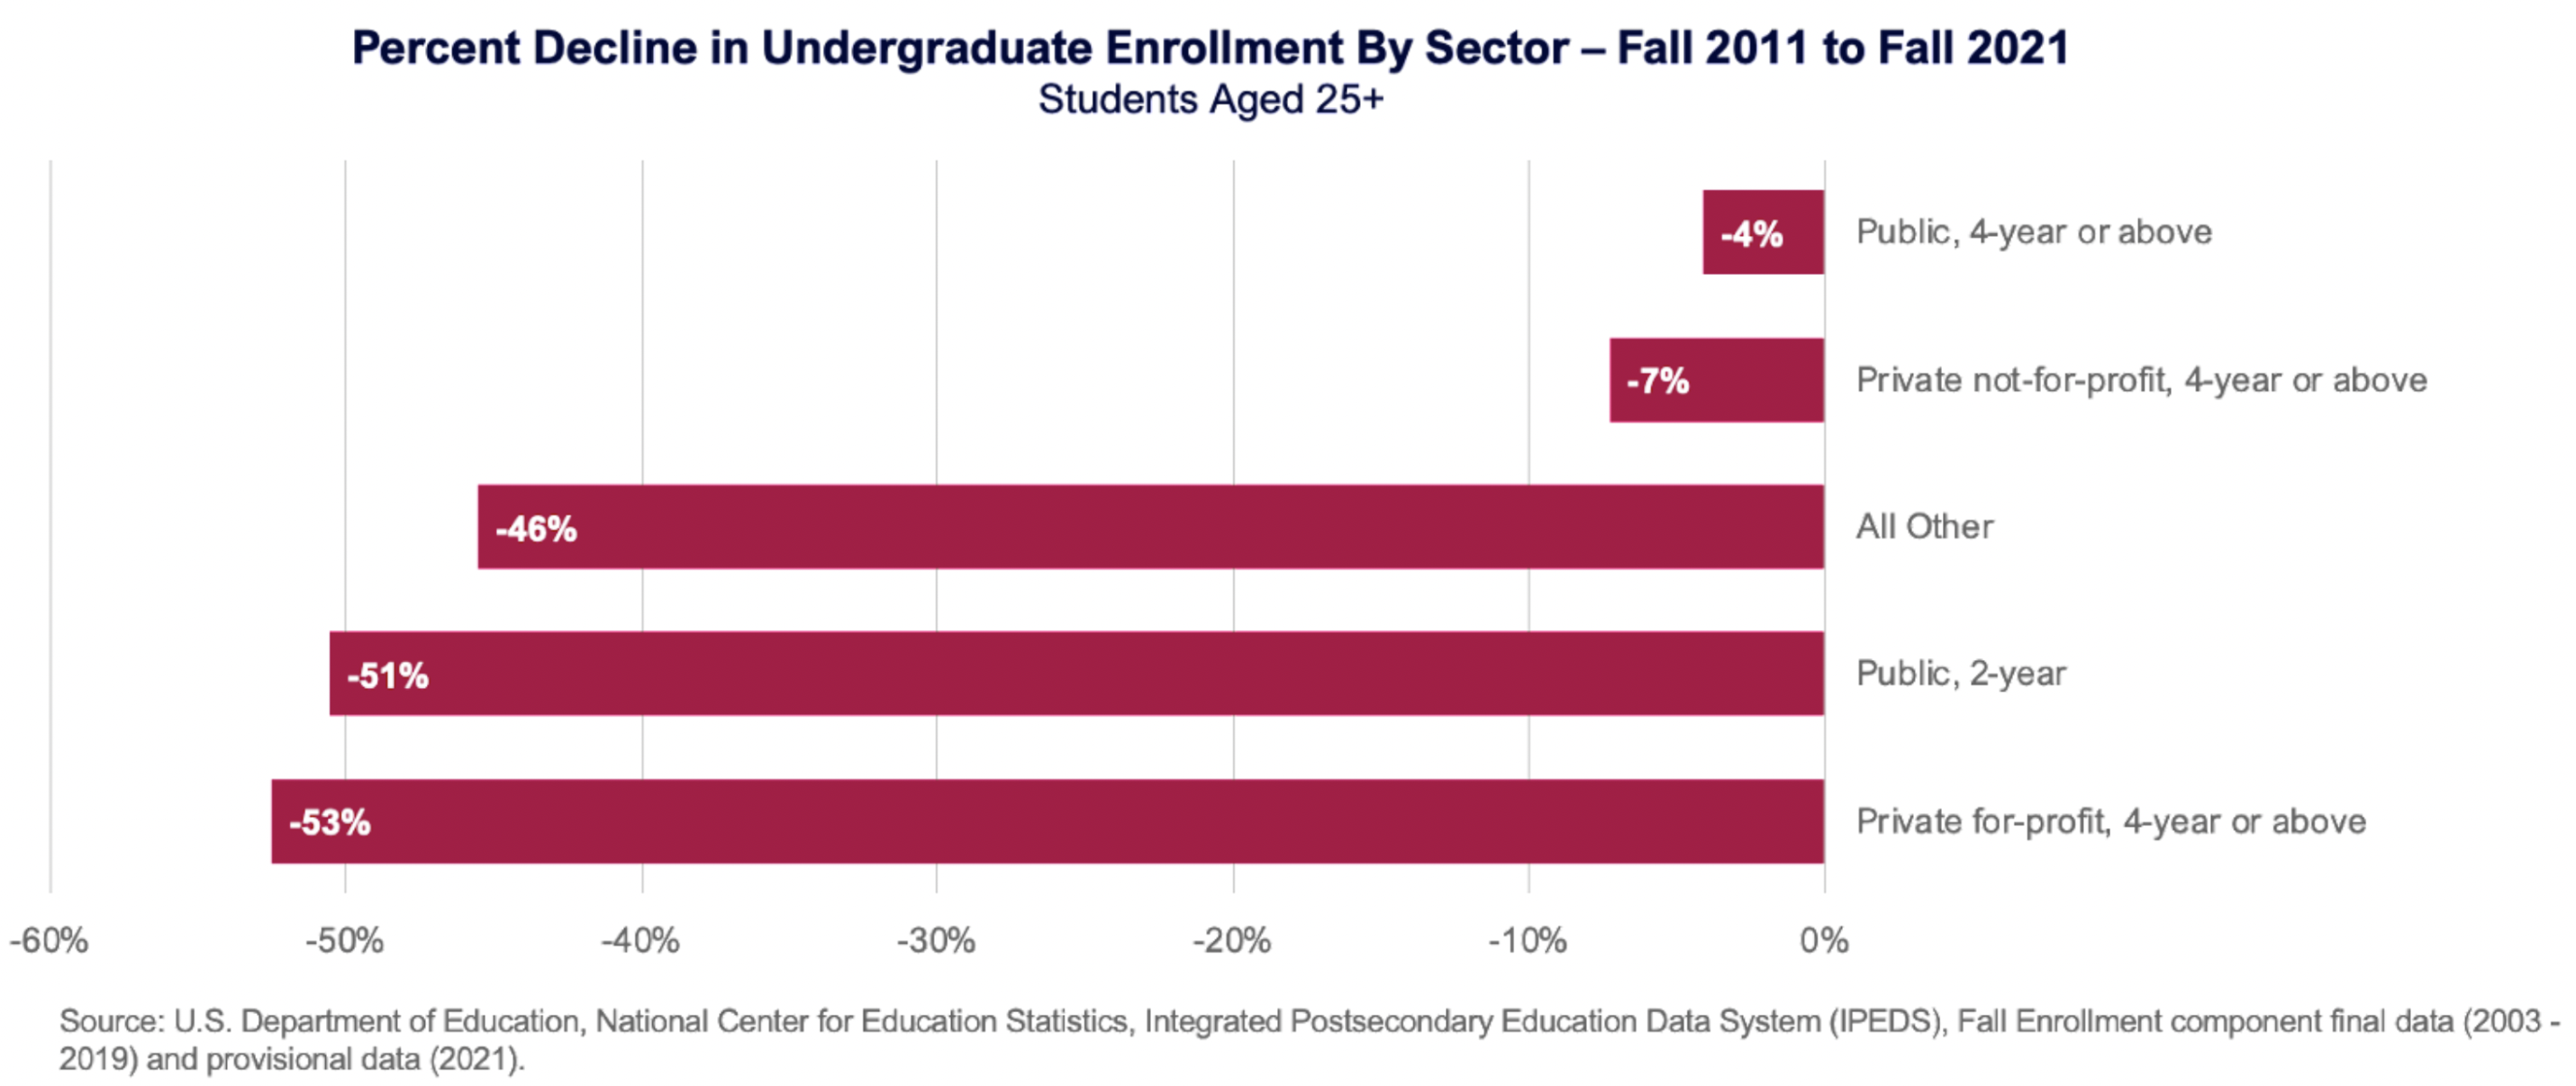 Percent Decline in Undergraduate Enrollment by Sector - Fall 2011 to Fall 2021